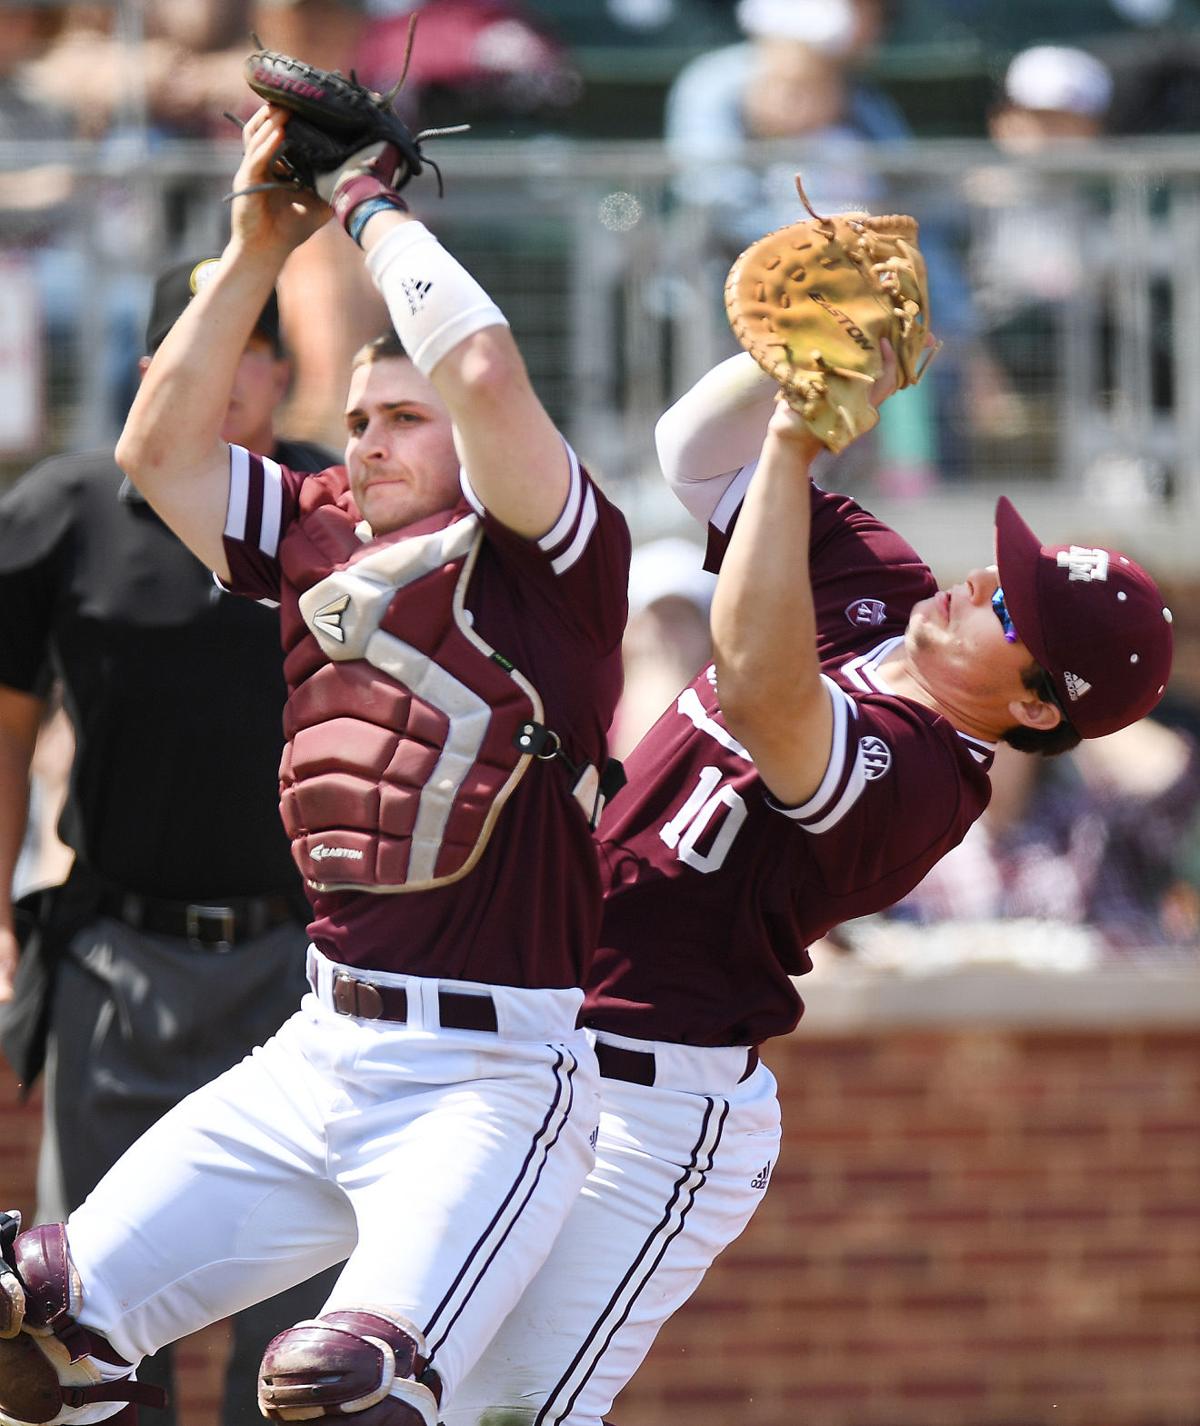 Texas A&M baseball team to open series at Kentucky on Friday